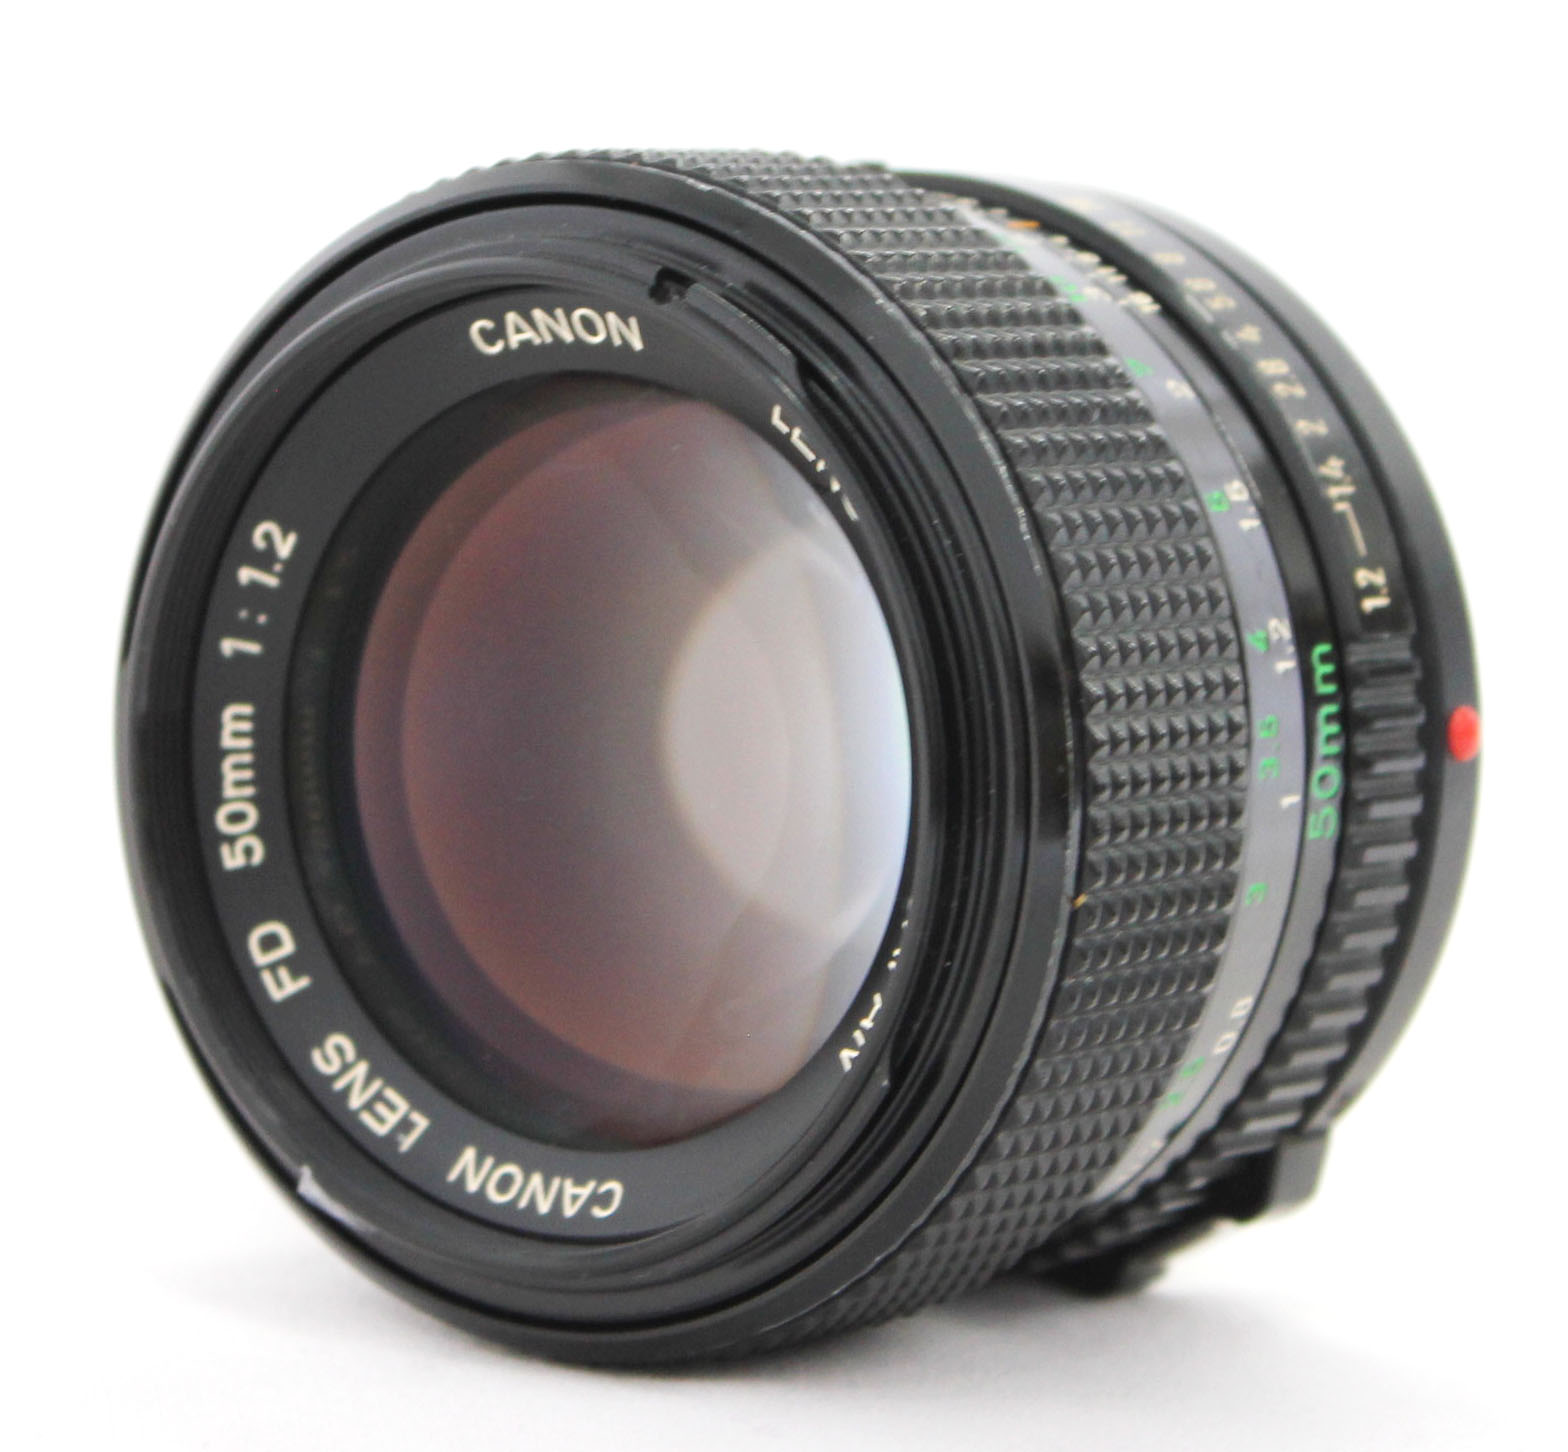 Japan Used Camera Shop | Canon New FD NFD 50mm F/1.2 MF Prime Lens from Japan